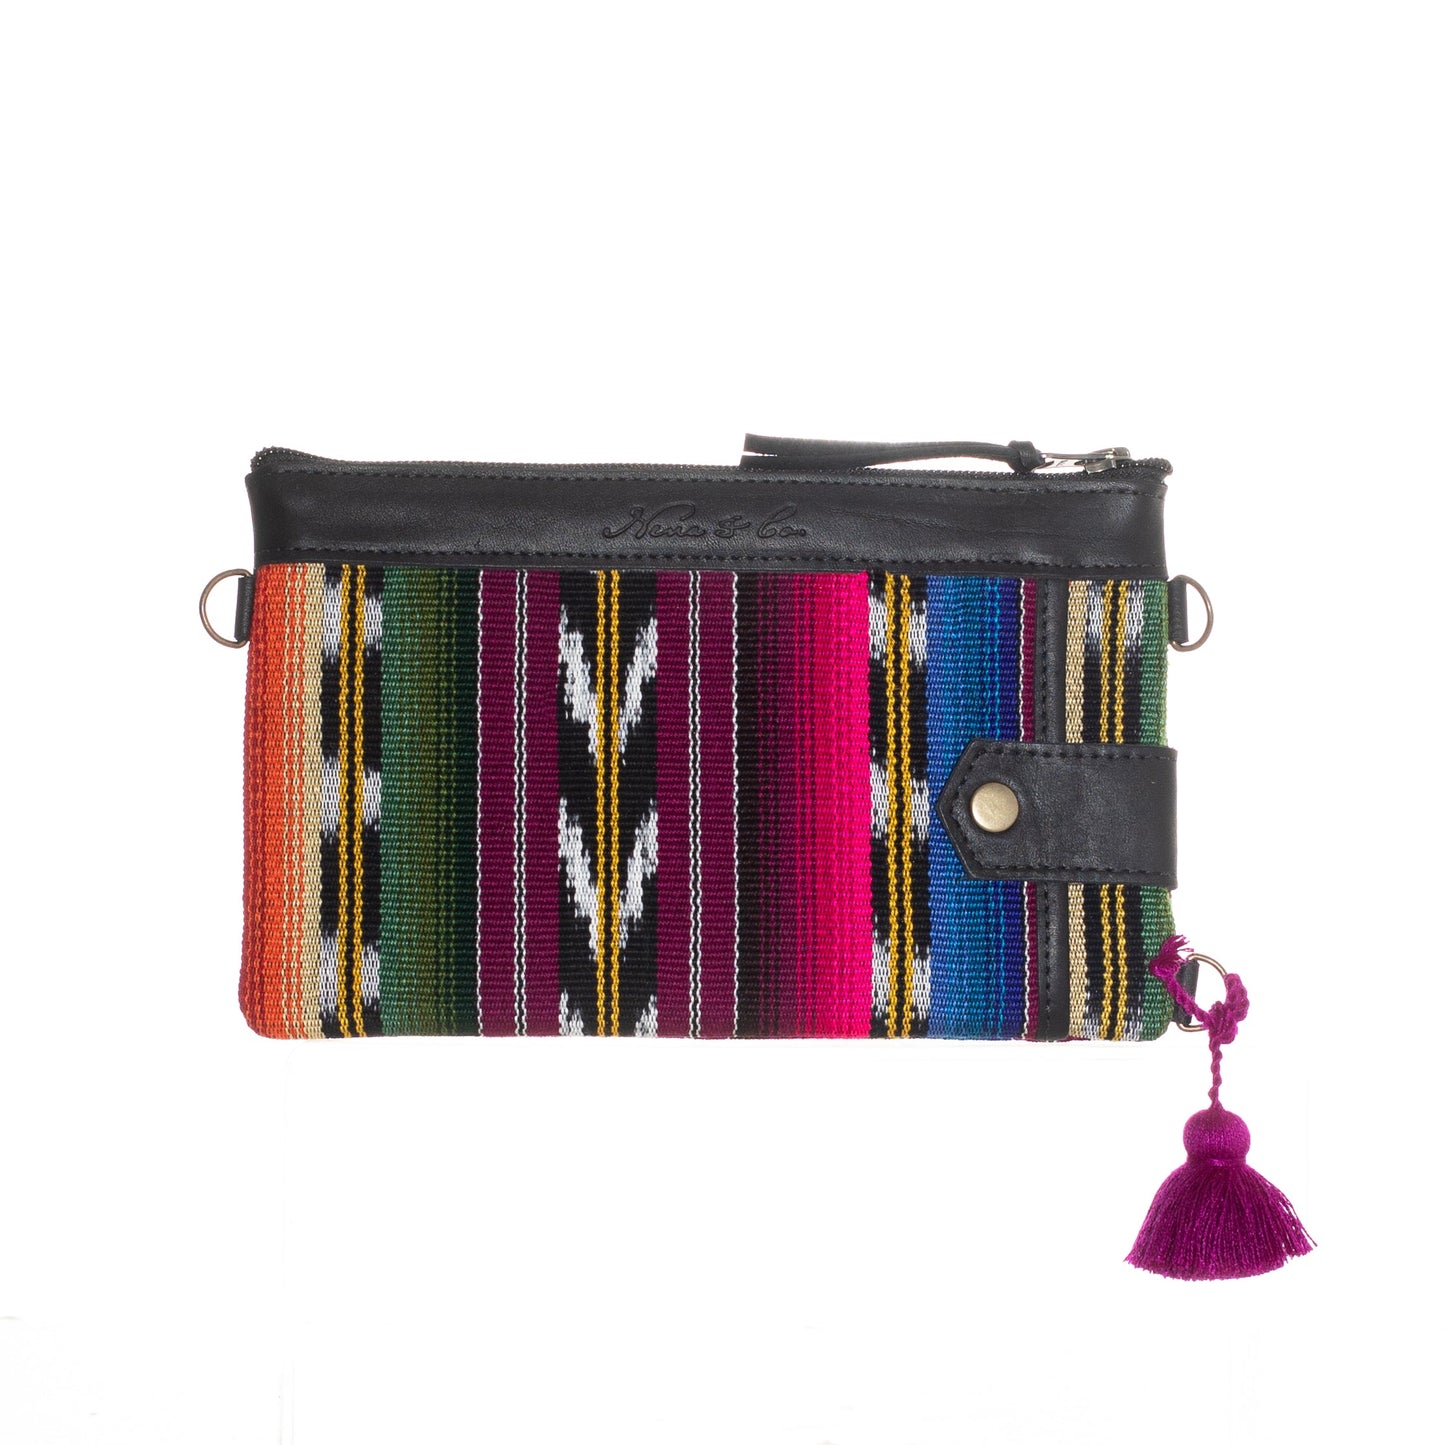 EVERYTHING CLUTCH WITH 3 D-RINGS - ARTISAN COLLECTION - RAINBOW FALLS - BLACK LEATHER